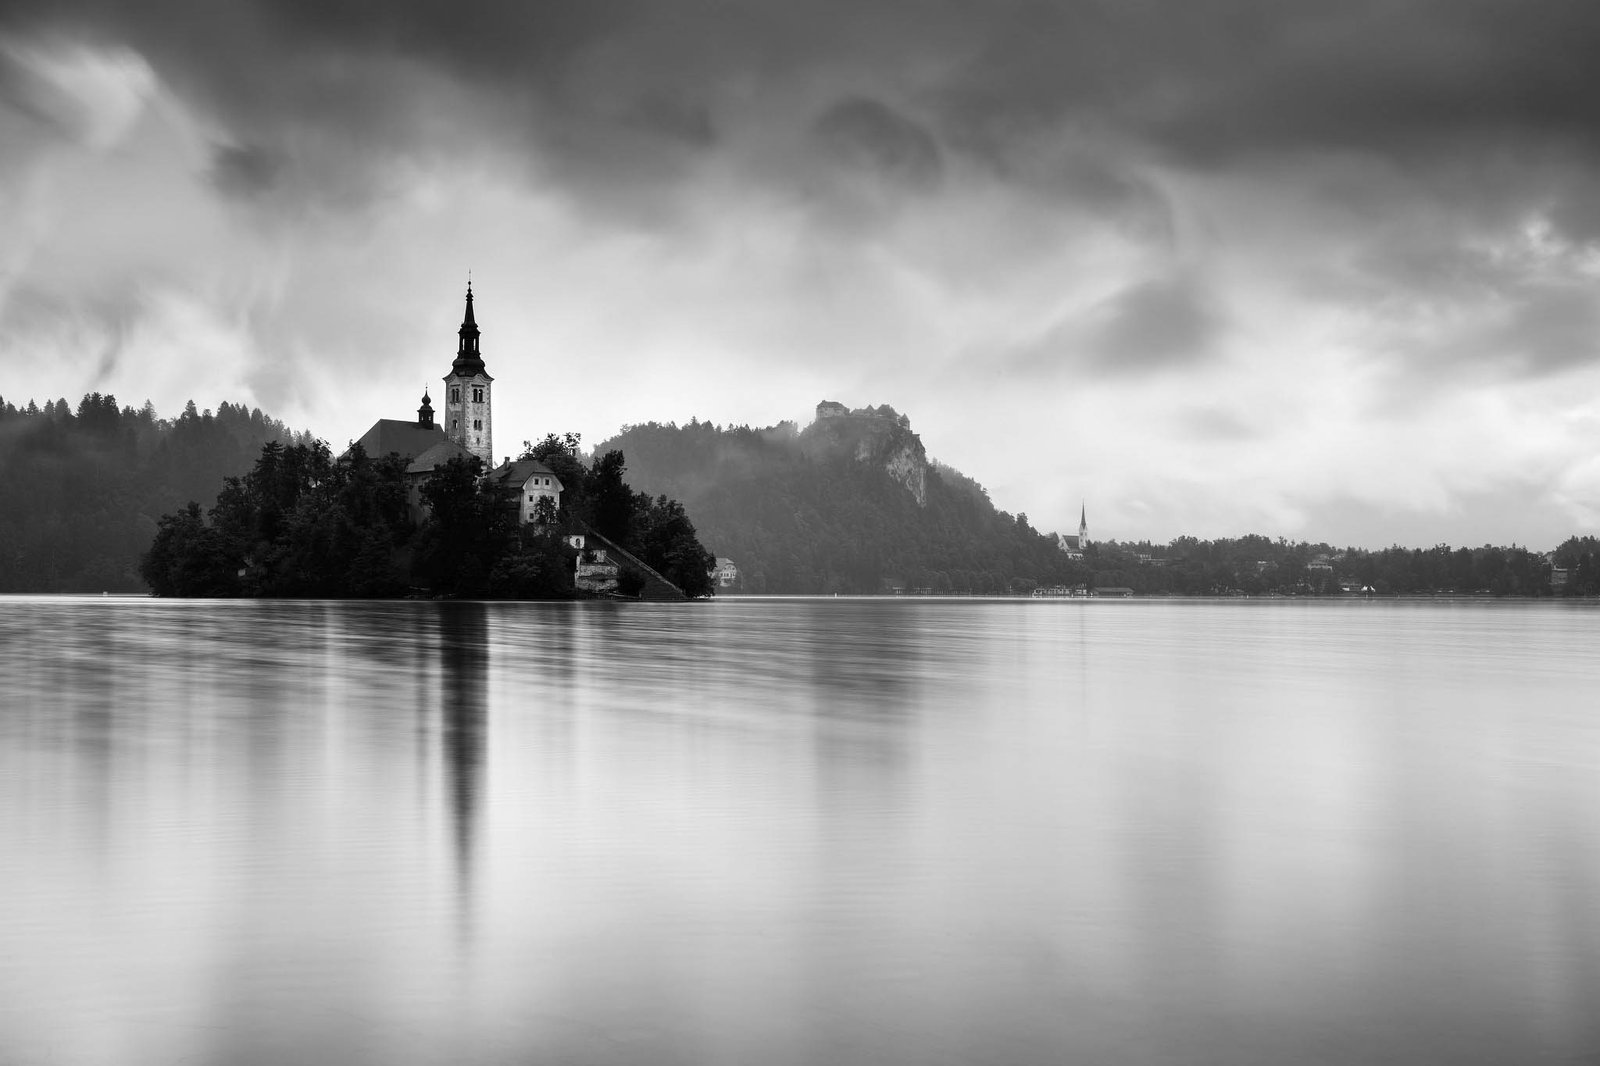 Morning at Lake Bled's island church of the assumption of saint mary and hilltop castle after a night of heavy summer rain, Slovenia.